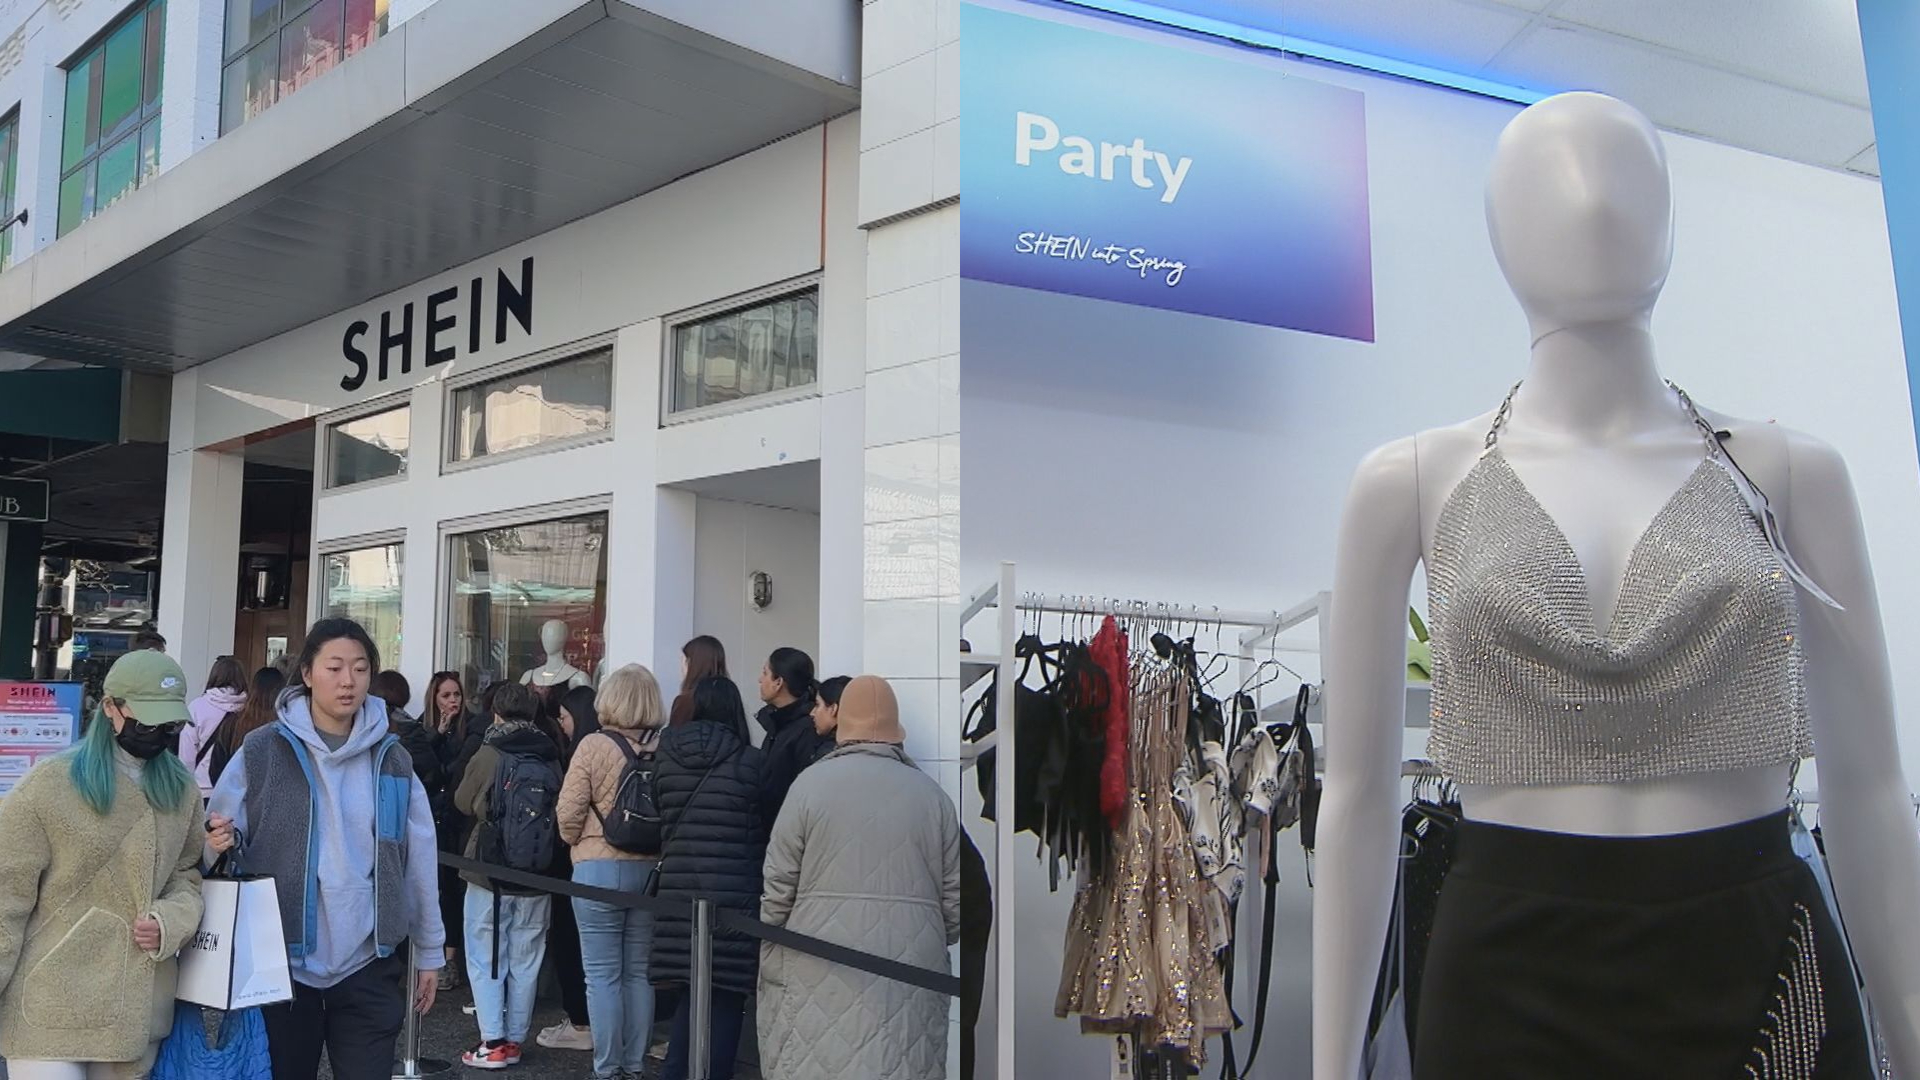 Hundreds line up for Shein pop-up store in Vancouver